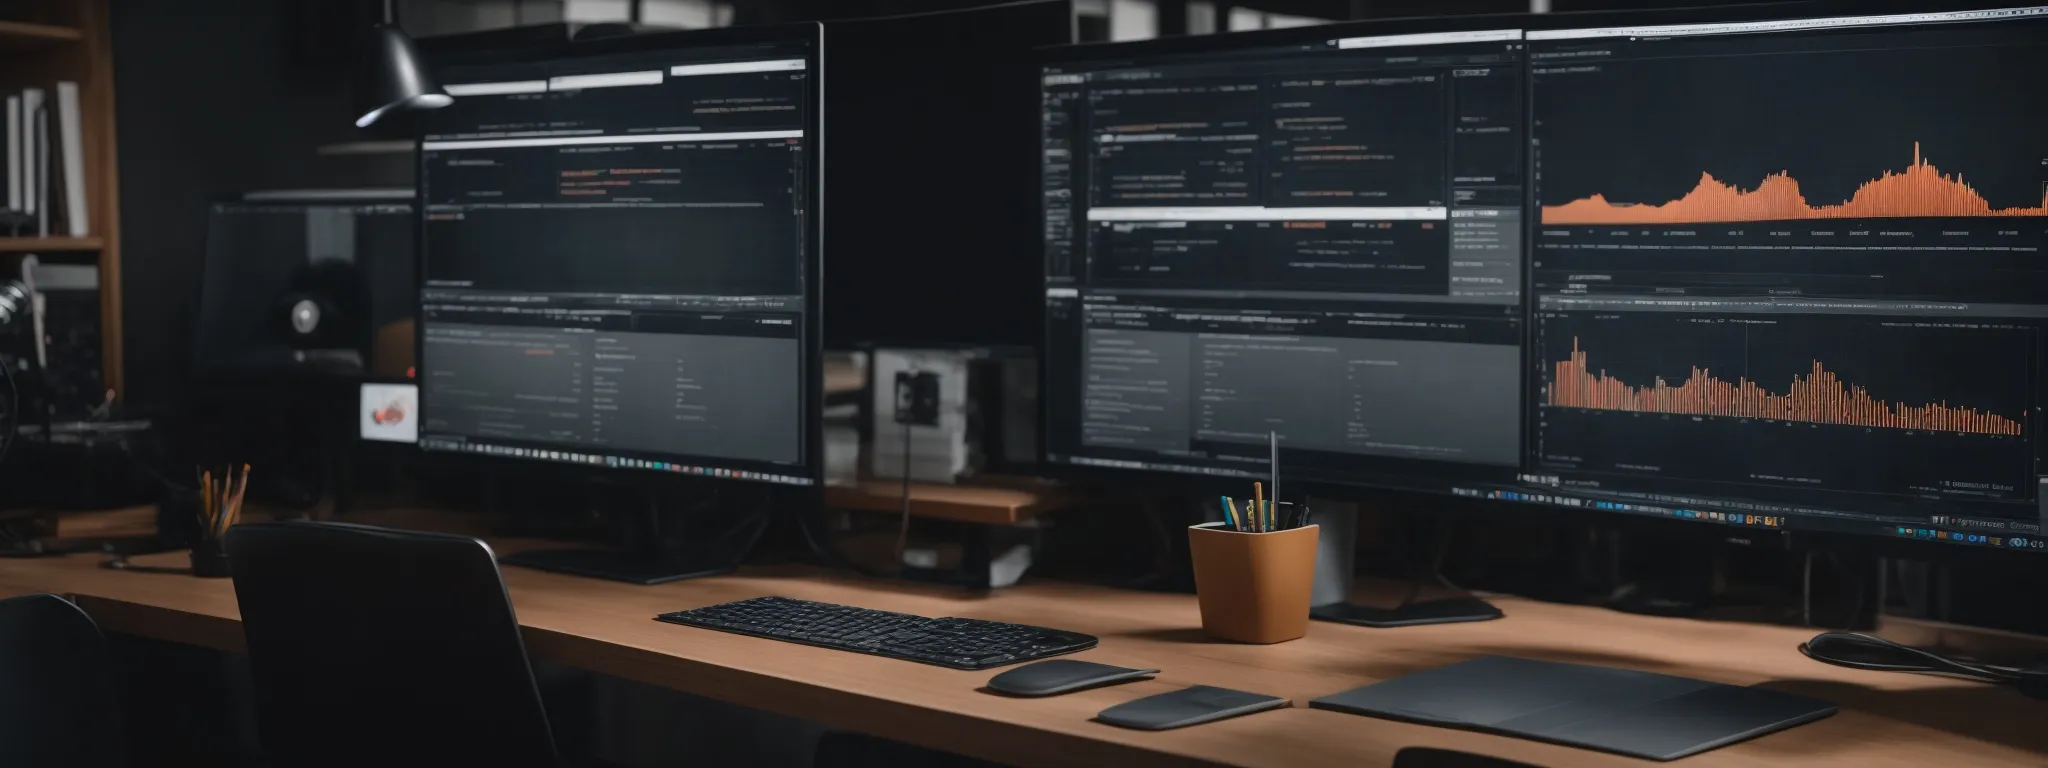 a web designer sits before dual monitors, showcasing a web analytics dashboard on one and a website's landing page on the other, reflecting the blend of seo and cro tactics.